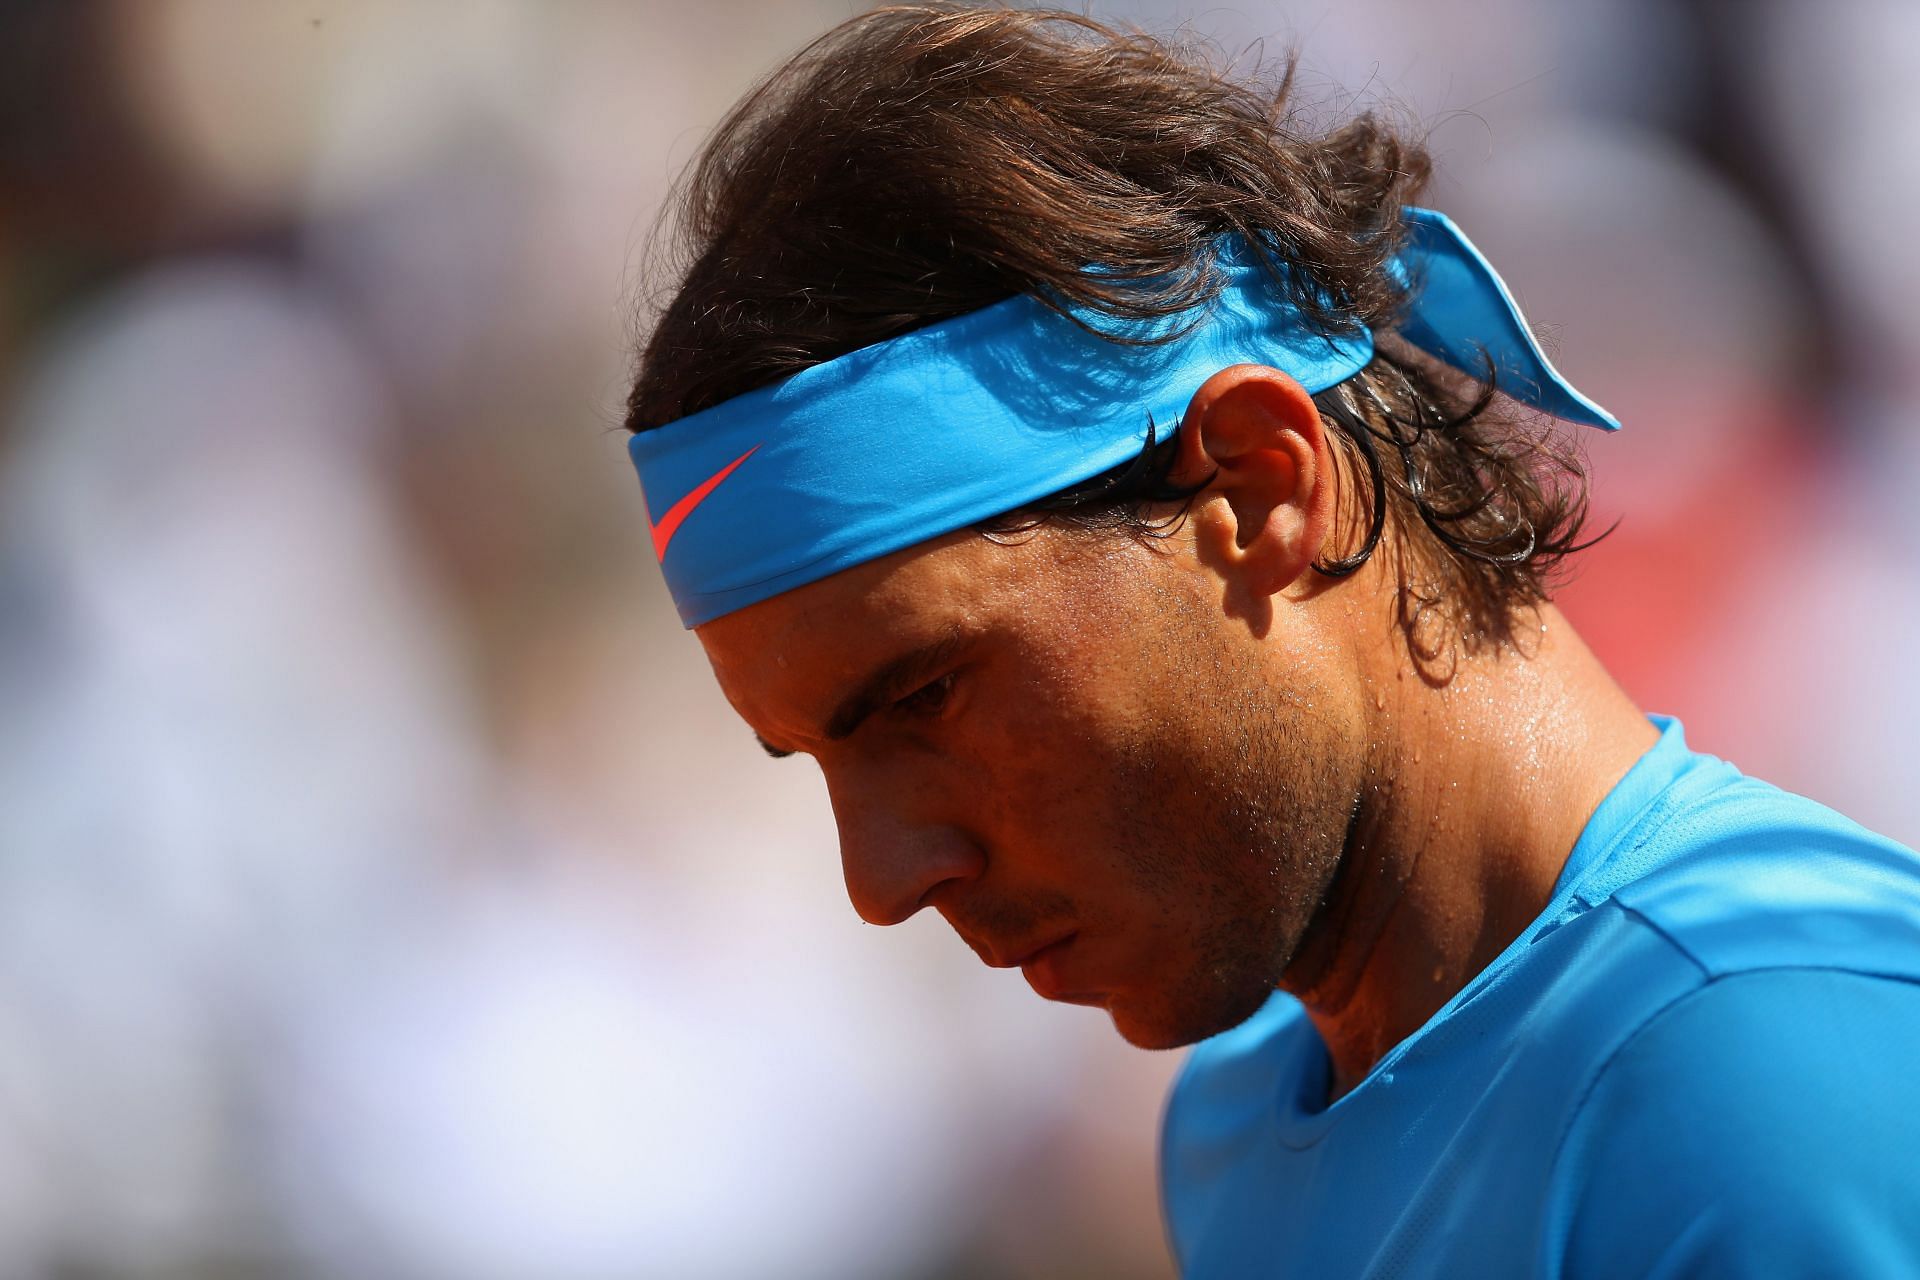 Rafael Nadal has suffered some big losses on clay despite holding an extremely impressive record on the surface.